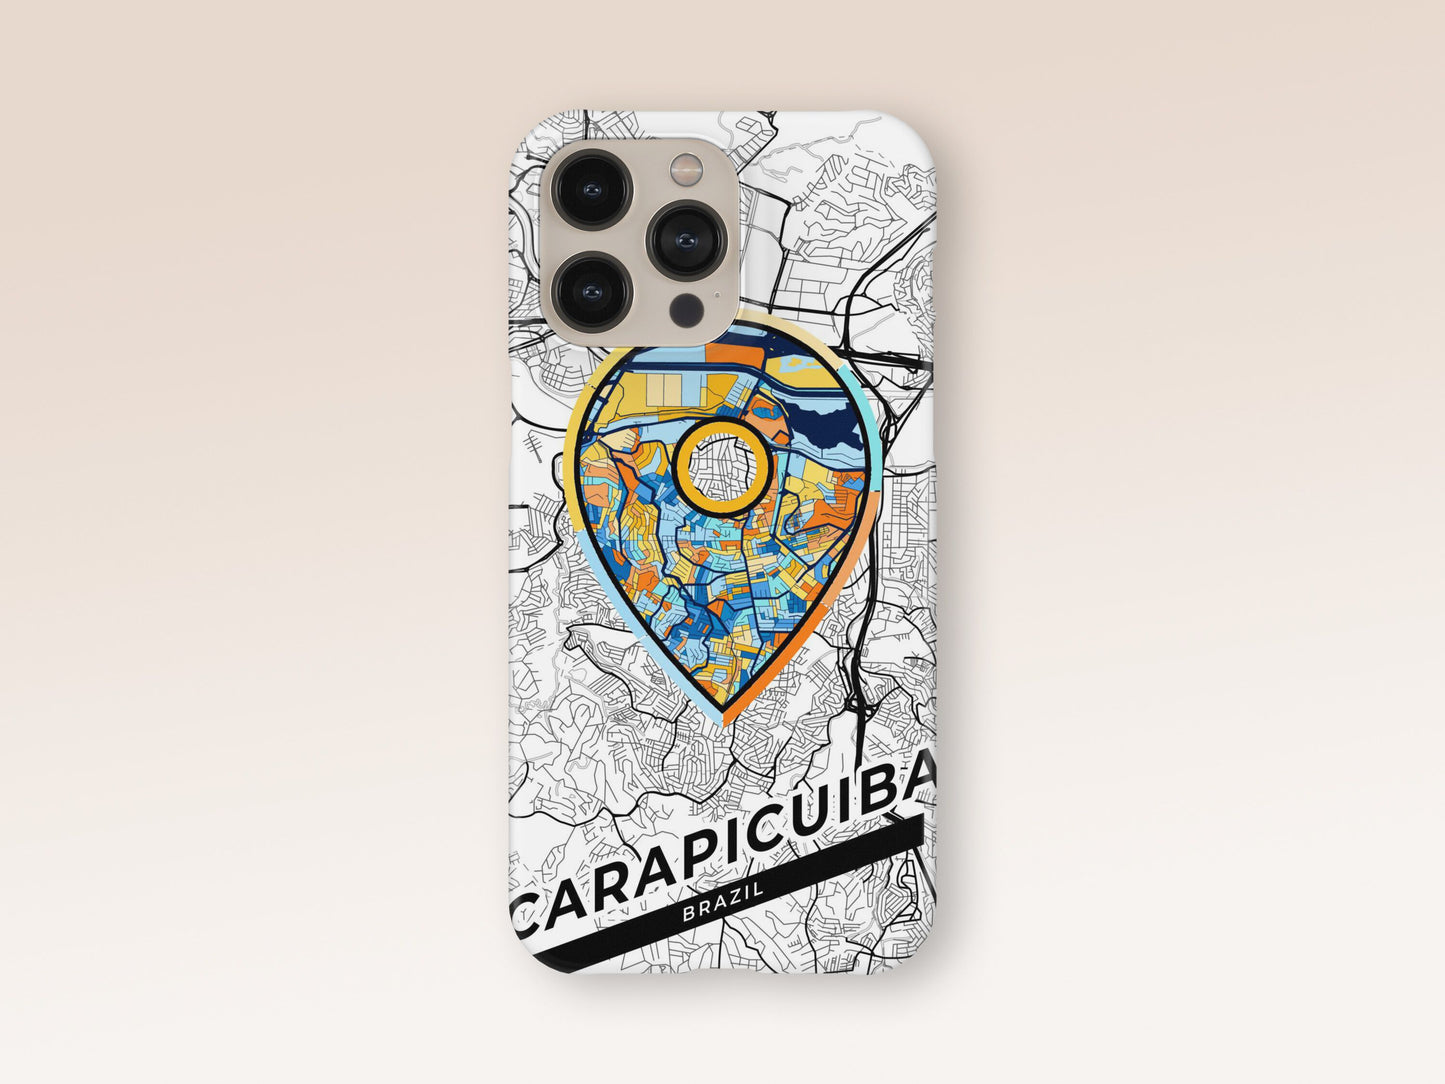 Carapicuiba Brazil slim phone case with colorful icon. Birthday, wedding or housewarming gift. Couple match cases. 1